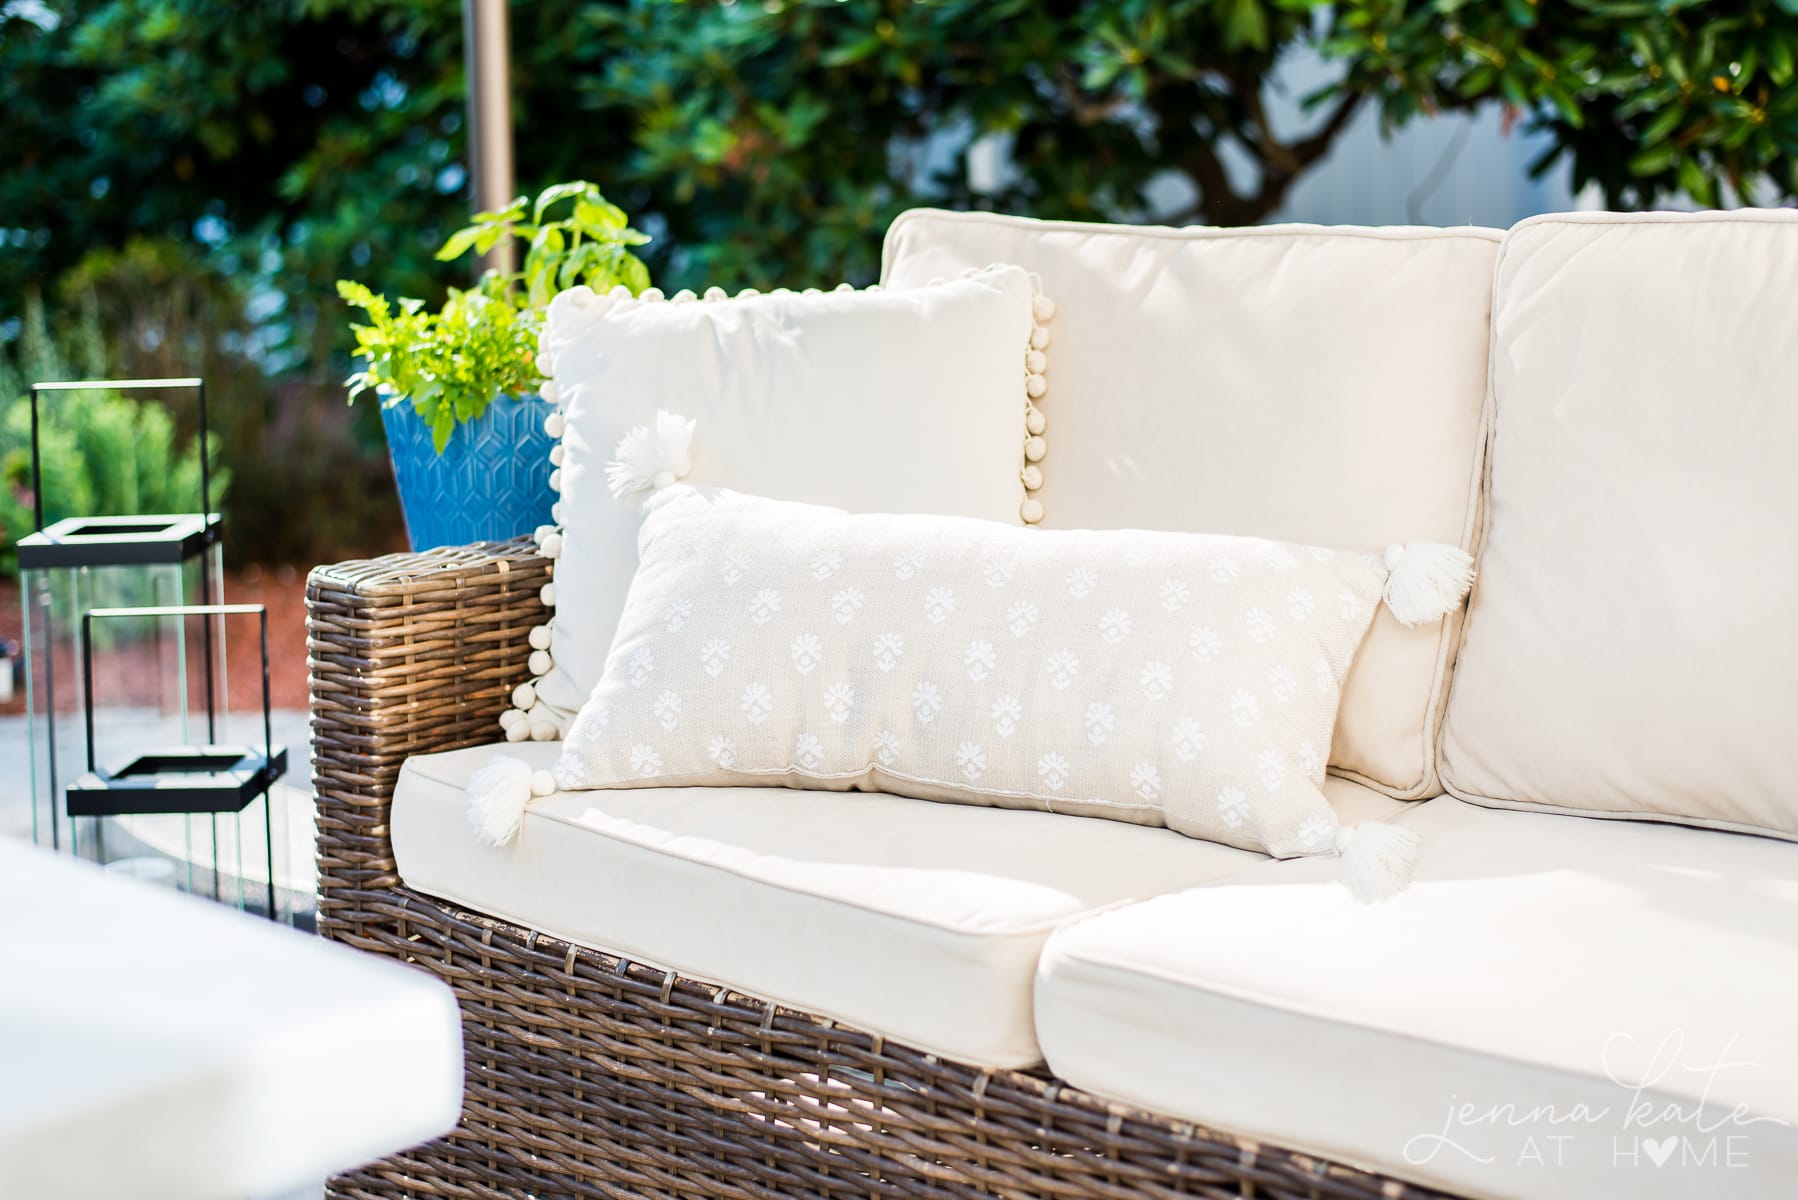 Outdoor cushions on a sectional with accent pillows and a planter of flowers